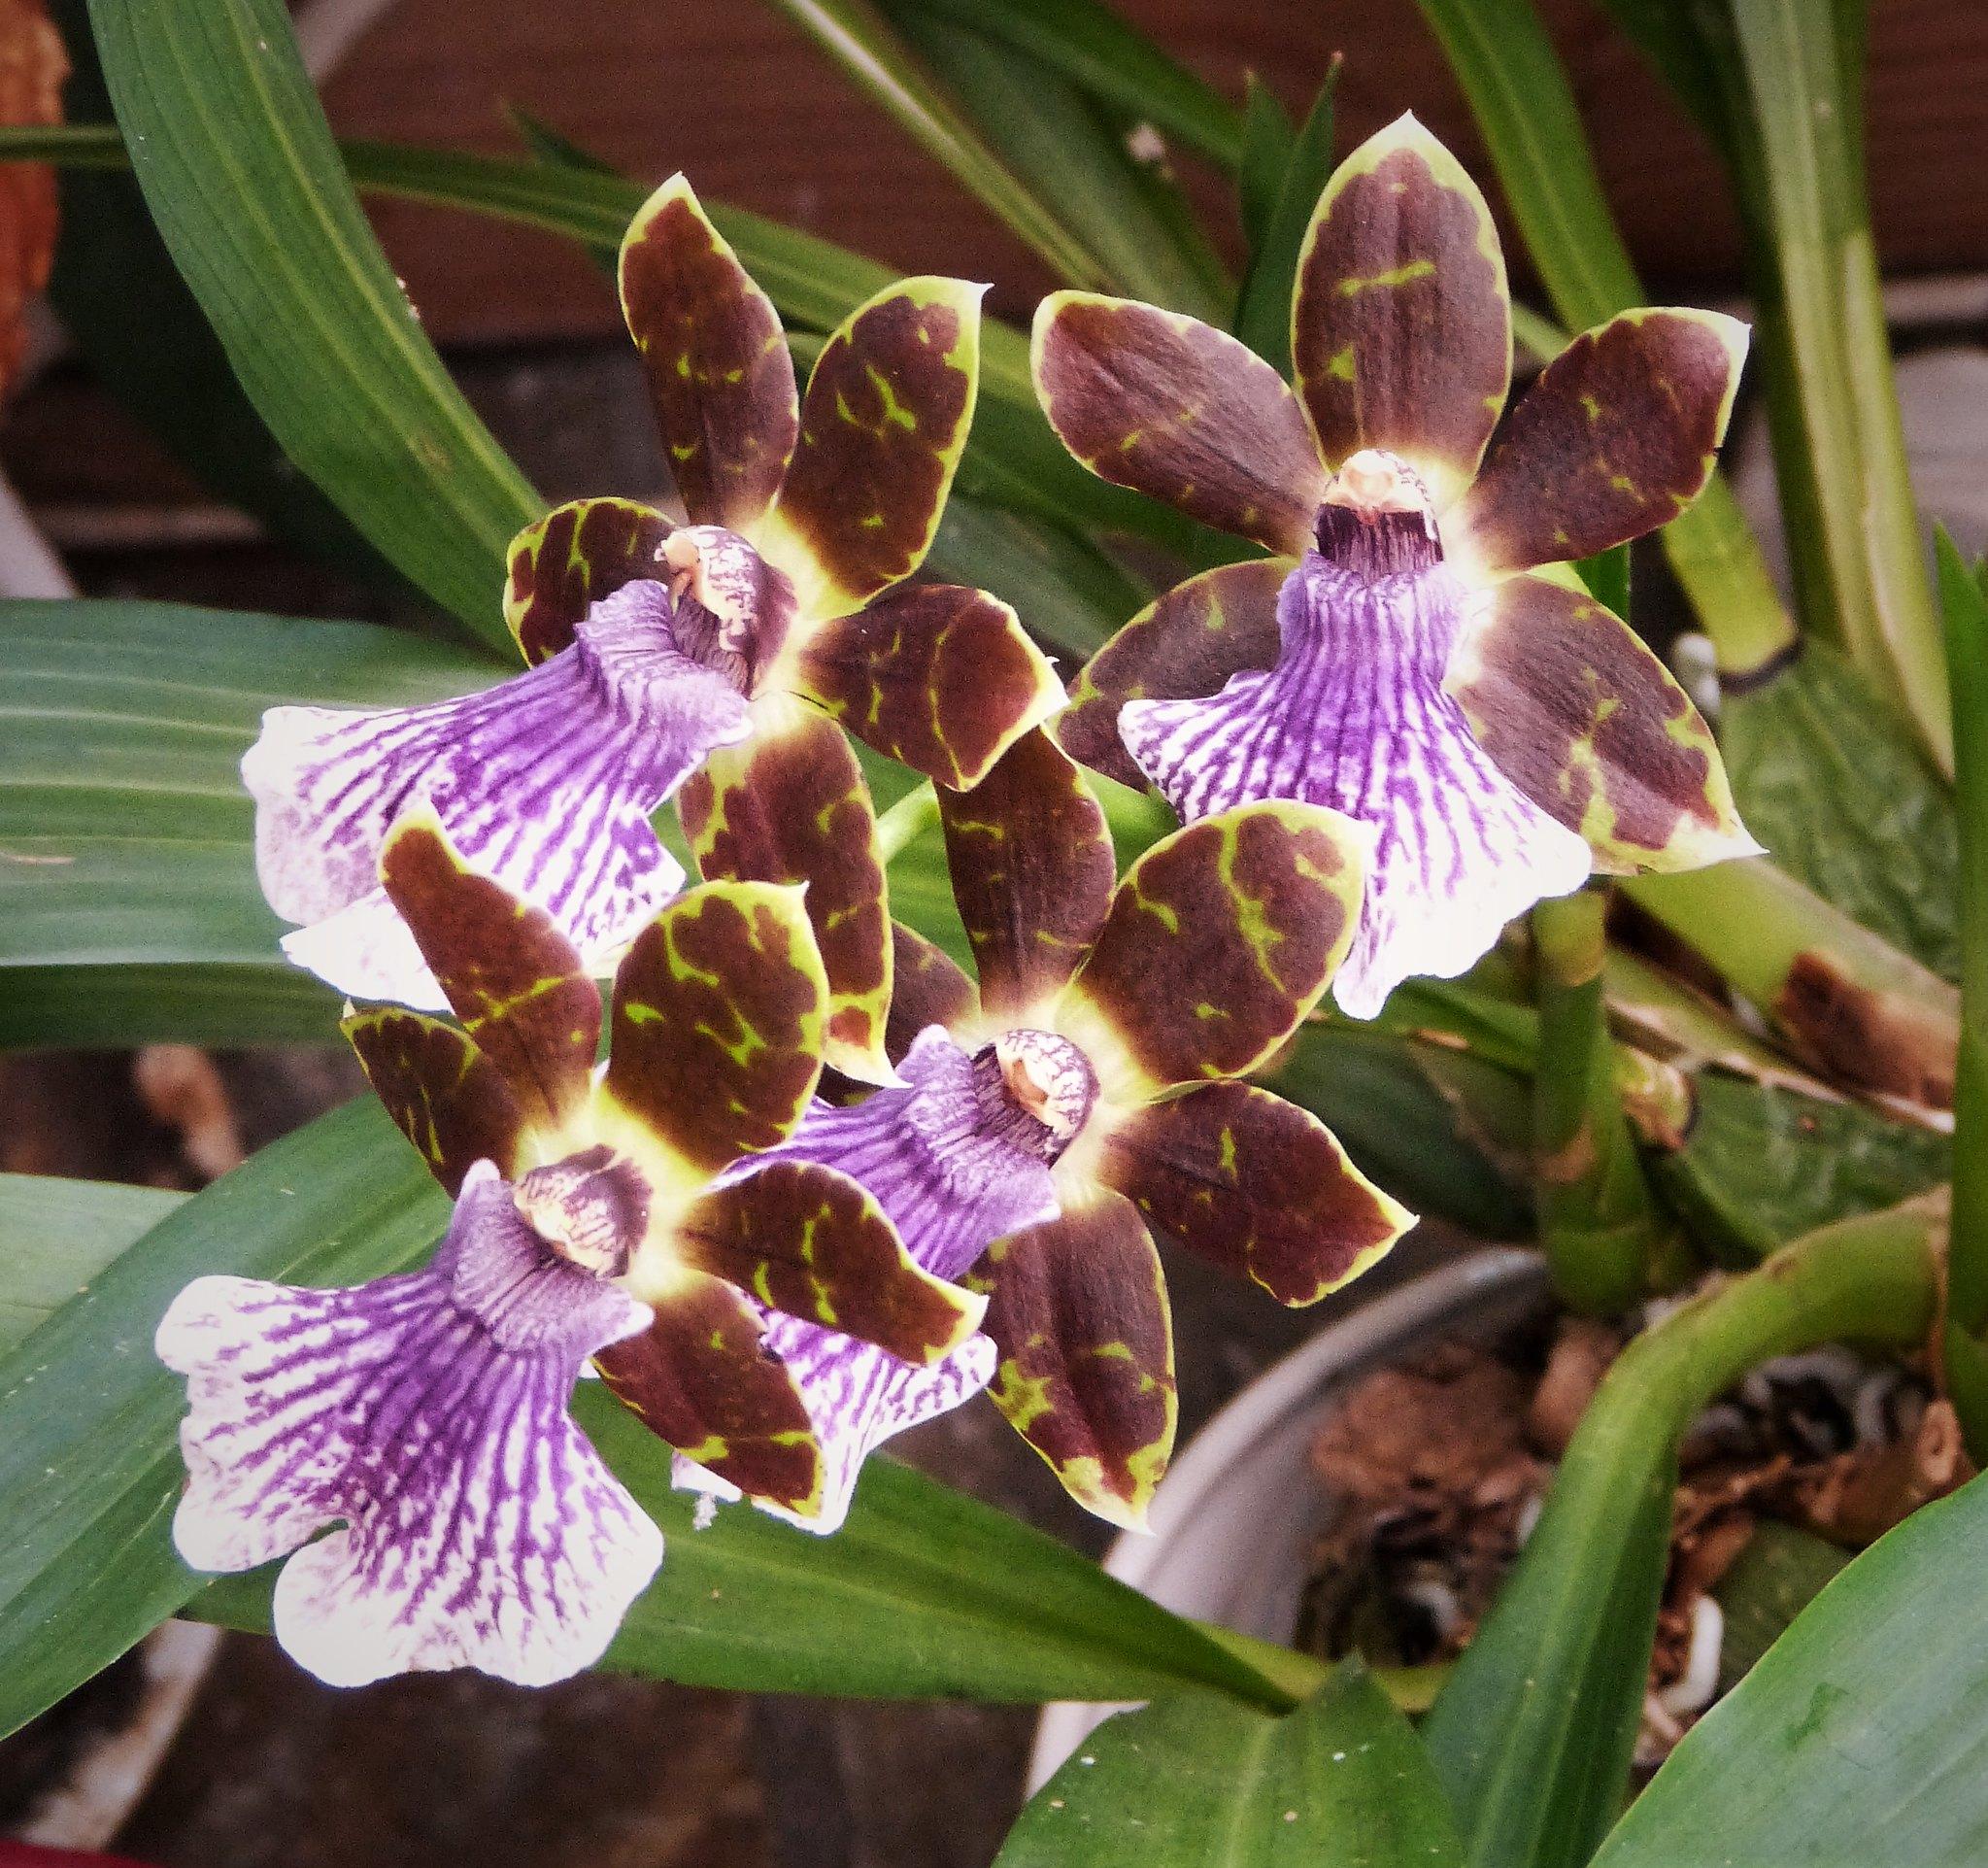 30 Popular Types Of Orchids Blessing From Mother Nature Constant Delights